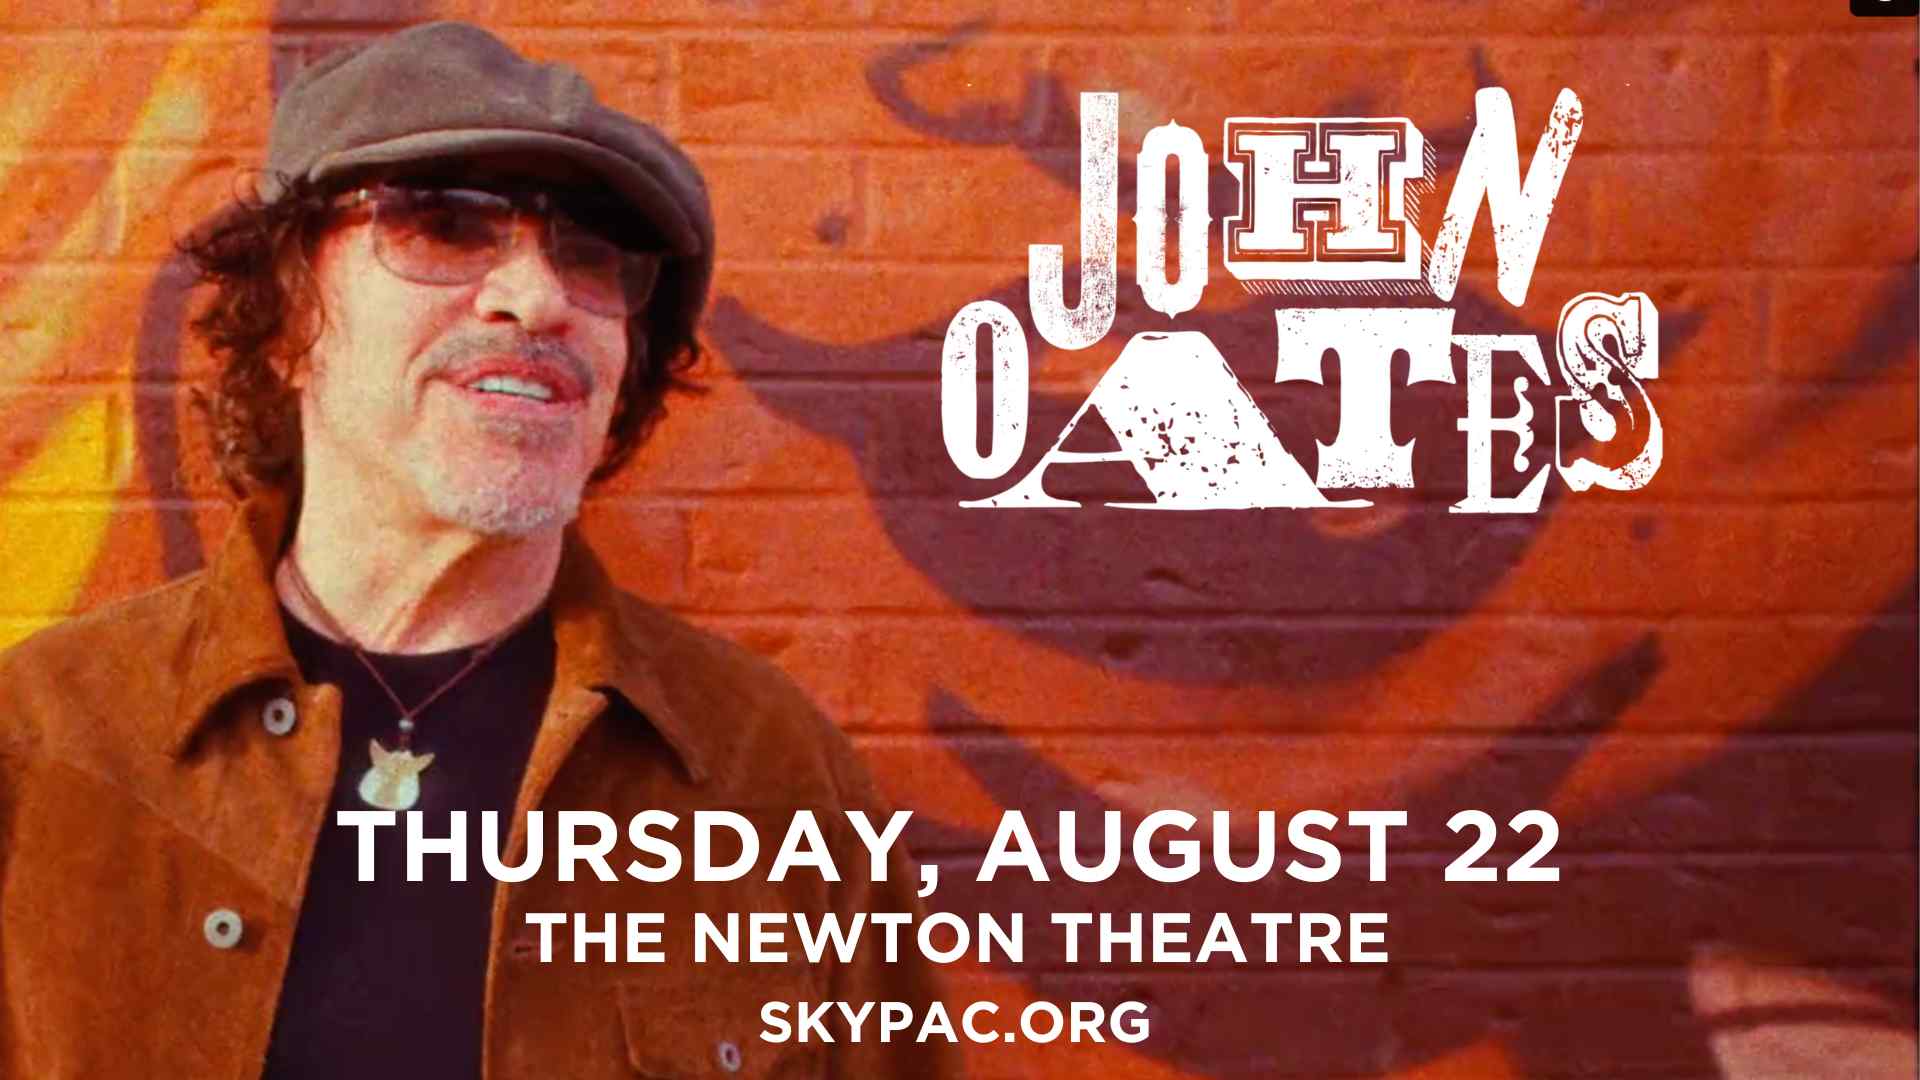 John Oates at The Newton Theatre on Thursday, August 22nd